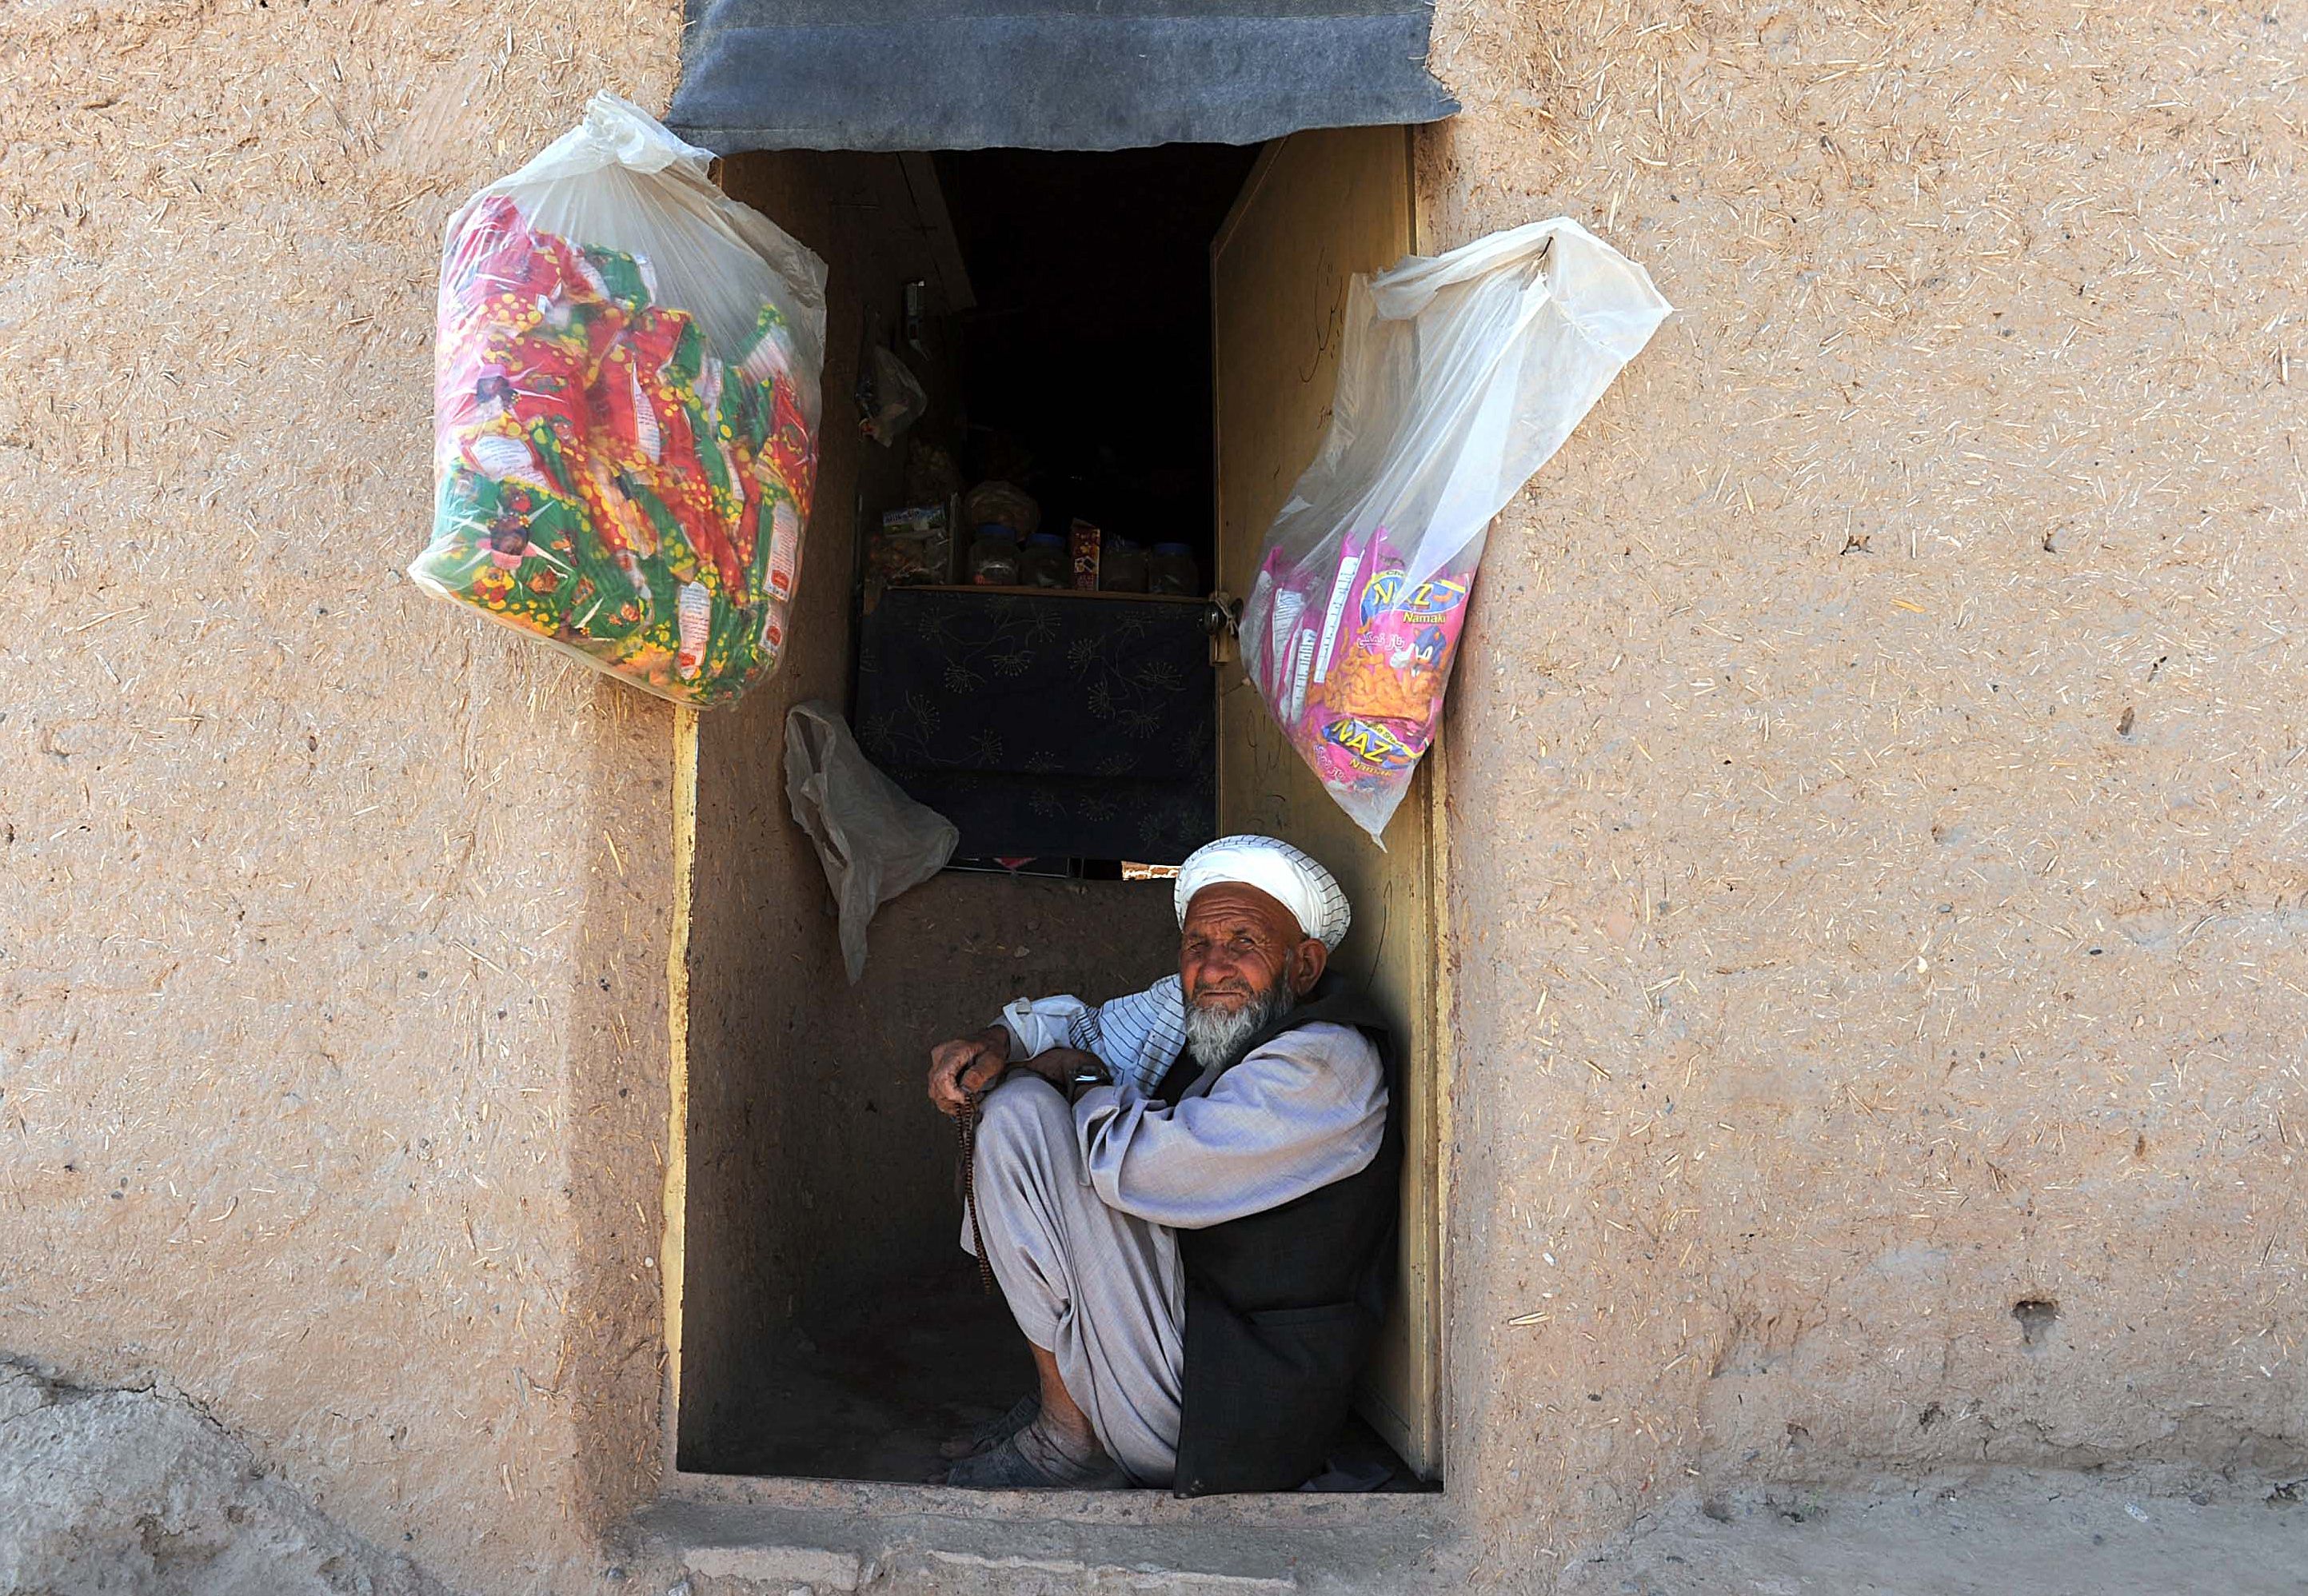 An Afghan shopkeeper sits at the door of his shop in Herat on 29 July 2012 (photo: AFP/Aref KARIMI)